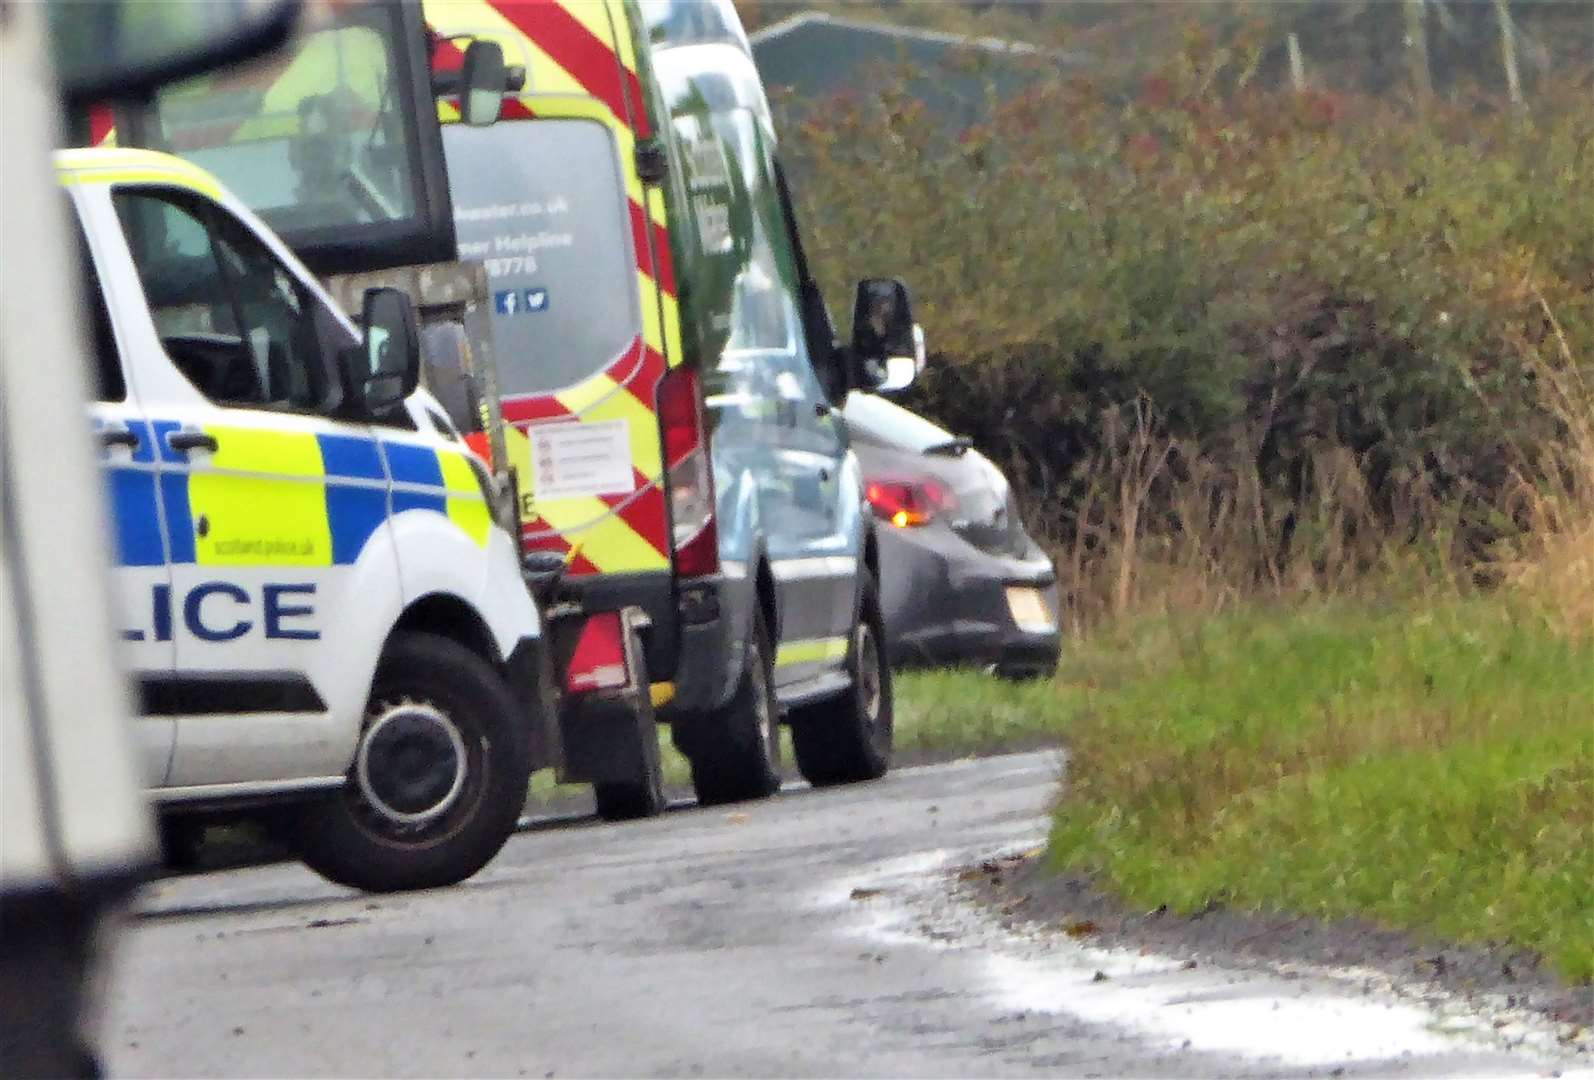 Scene at the crash site on the A882 with police in attendance.